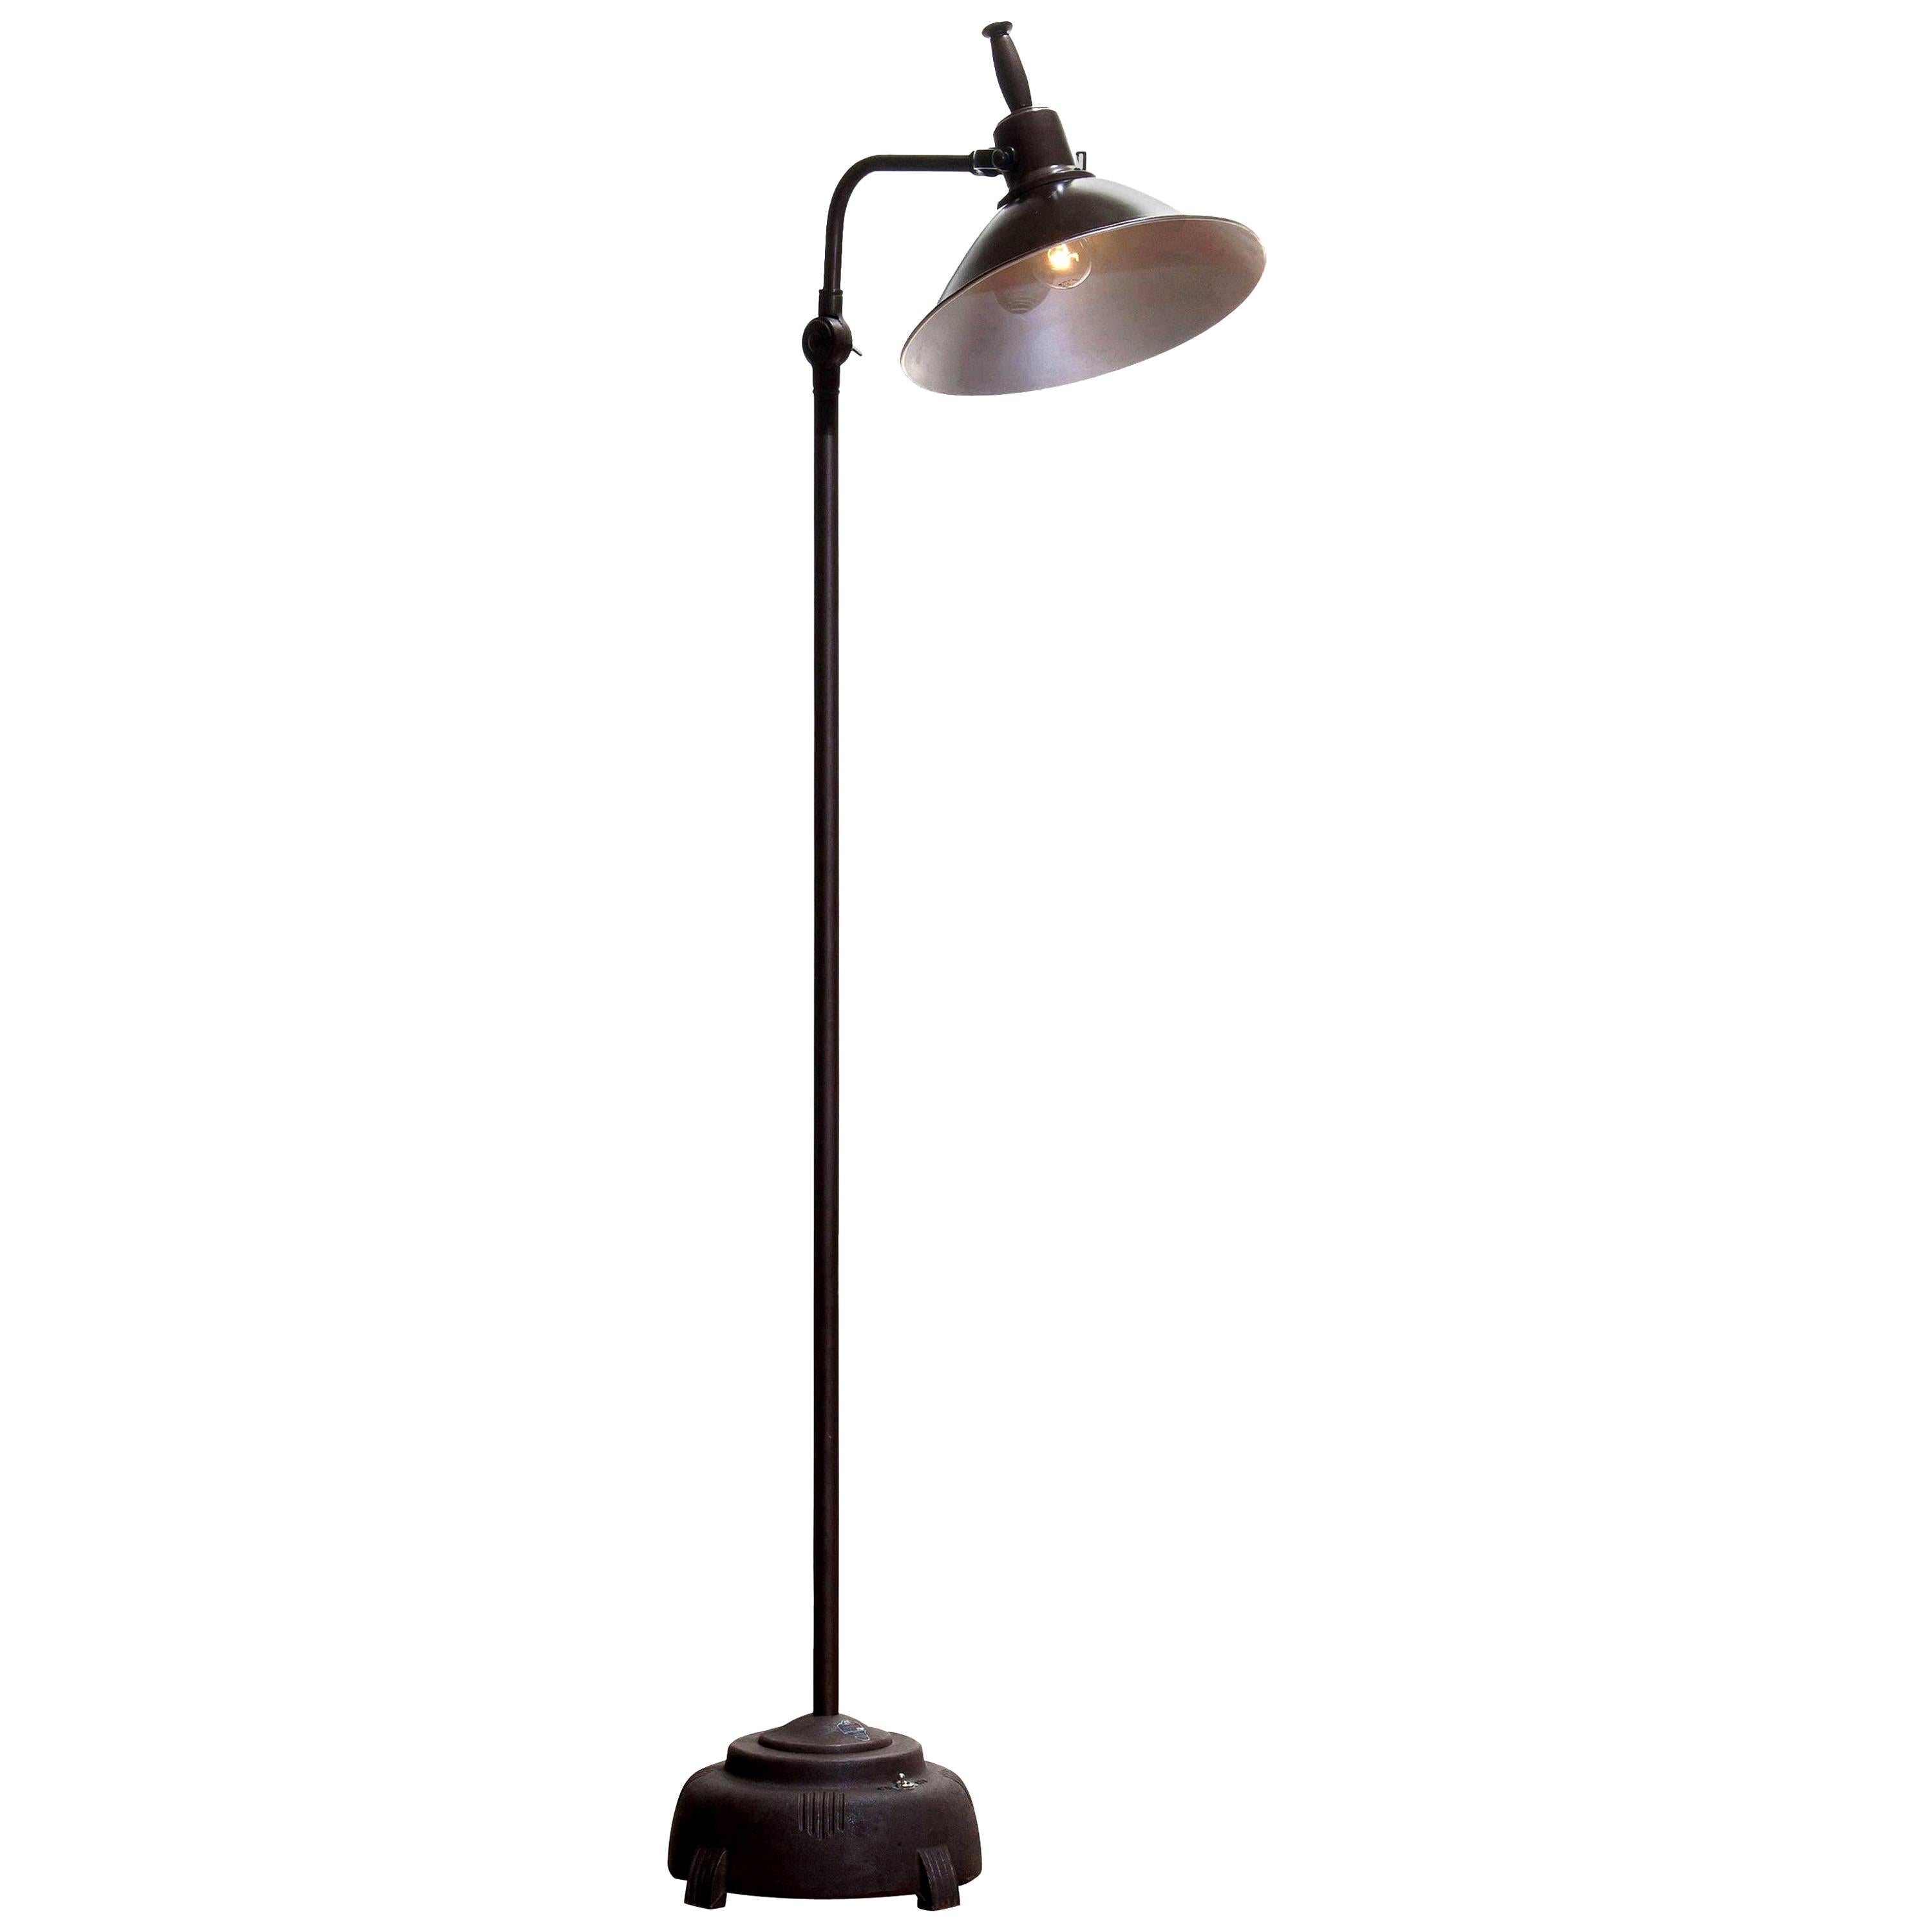 Absolutely amazing an in good condition Industrial floor lamp (formal sunlamp) from Faries Manufacturing MFG & Co. made in Illinois USA in brass or cast iron or aluminum!
The lamp is newly wired and therefore suitable for 220 / 110 volts max. 100